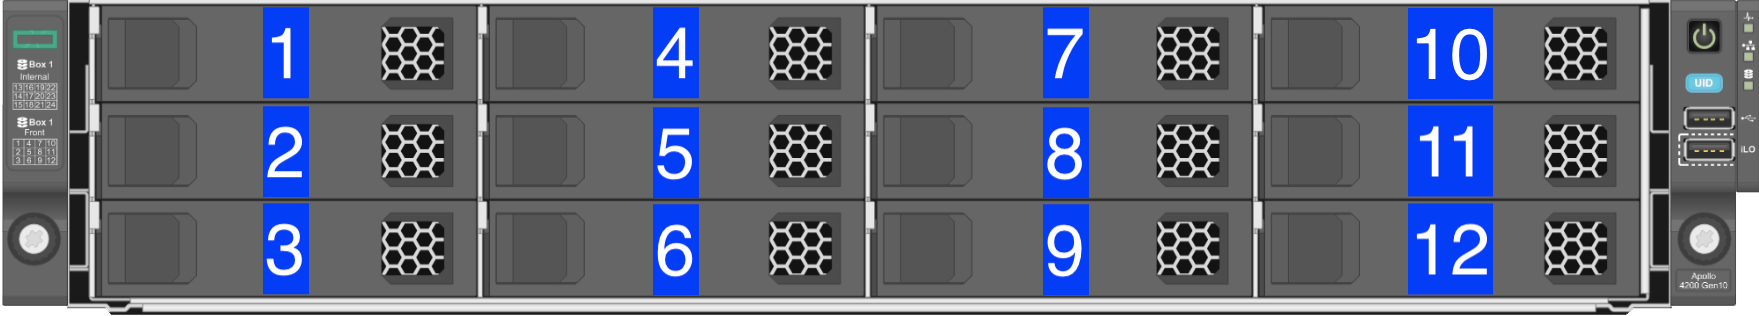 The front large form factor drive row in the HPE Apollo 4200 Gen10 node